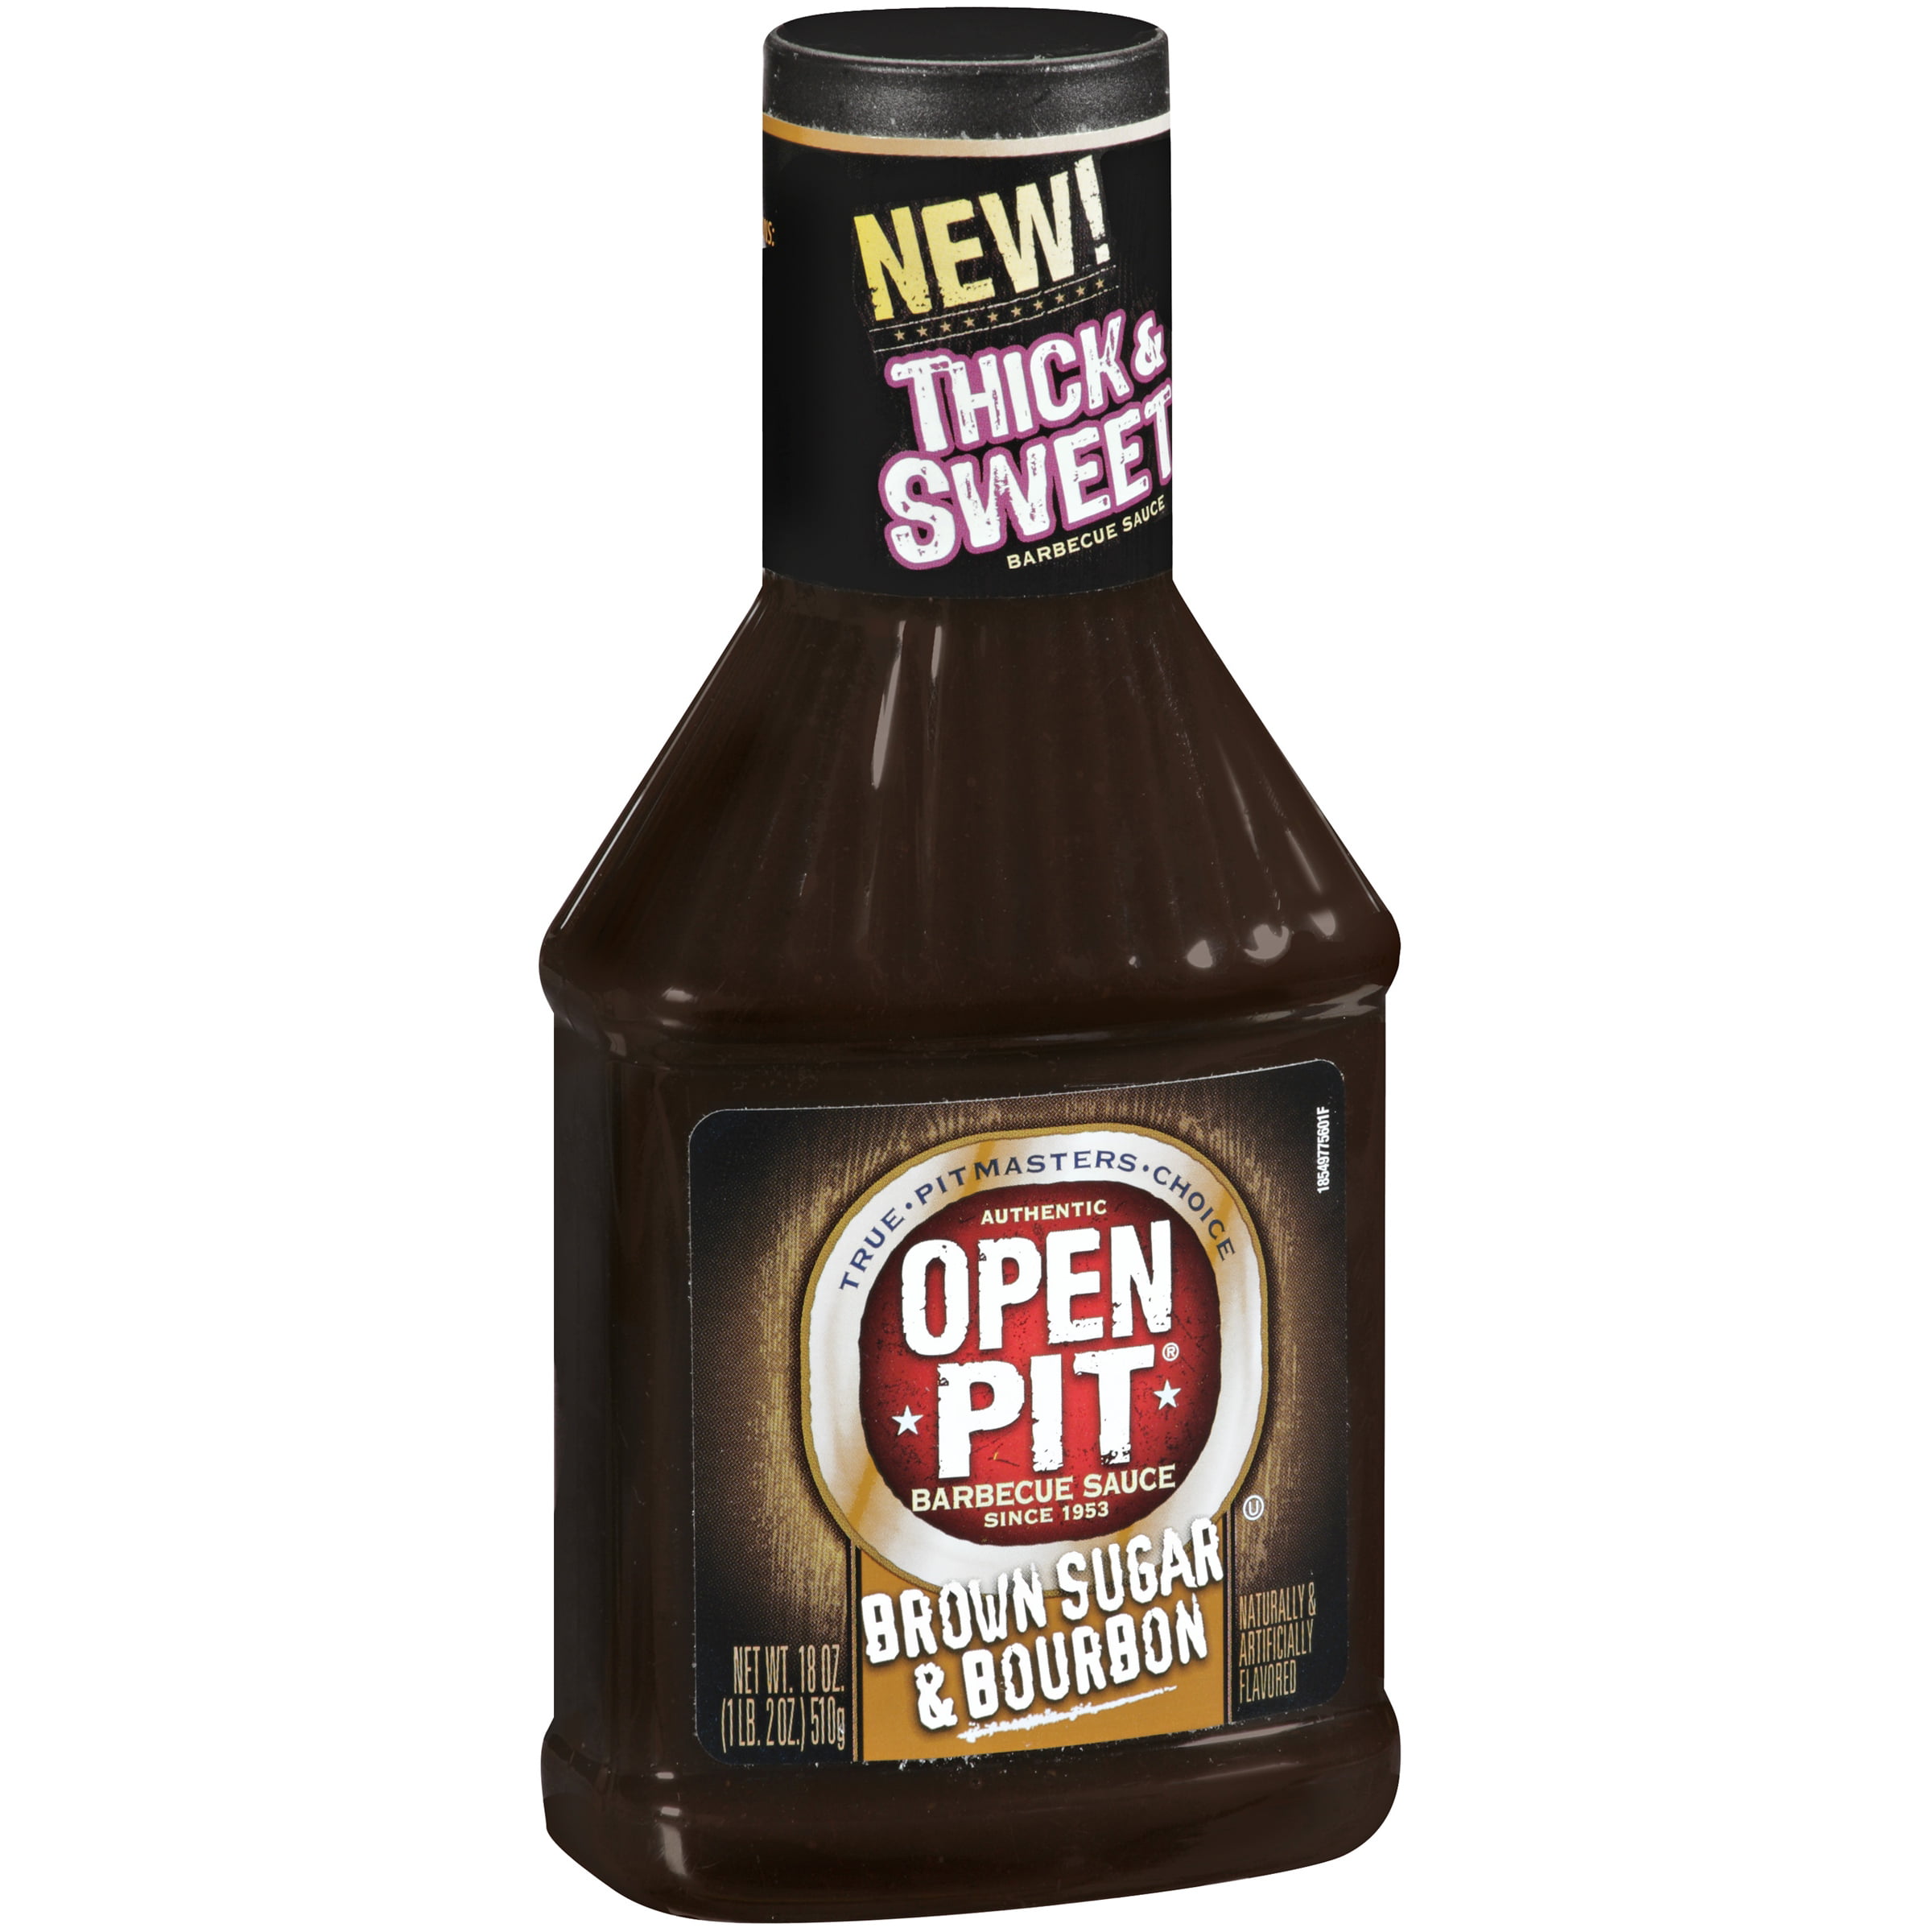 open pit barbecue sauce ingredients